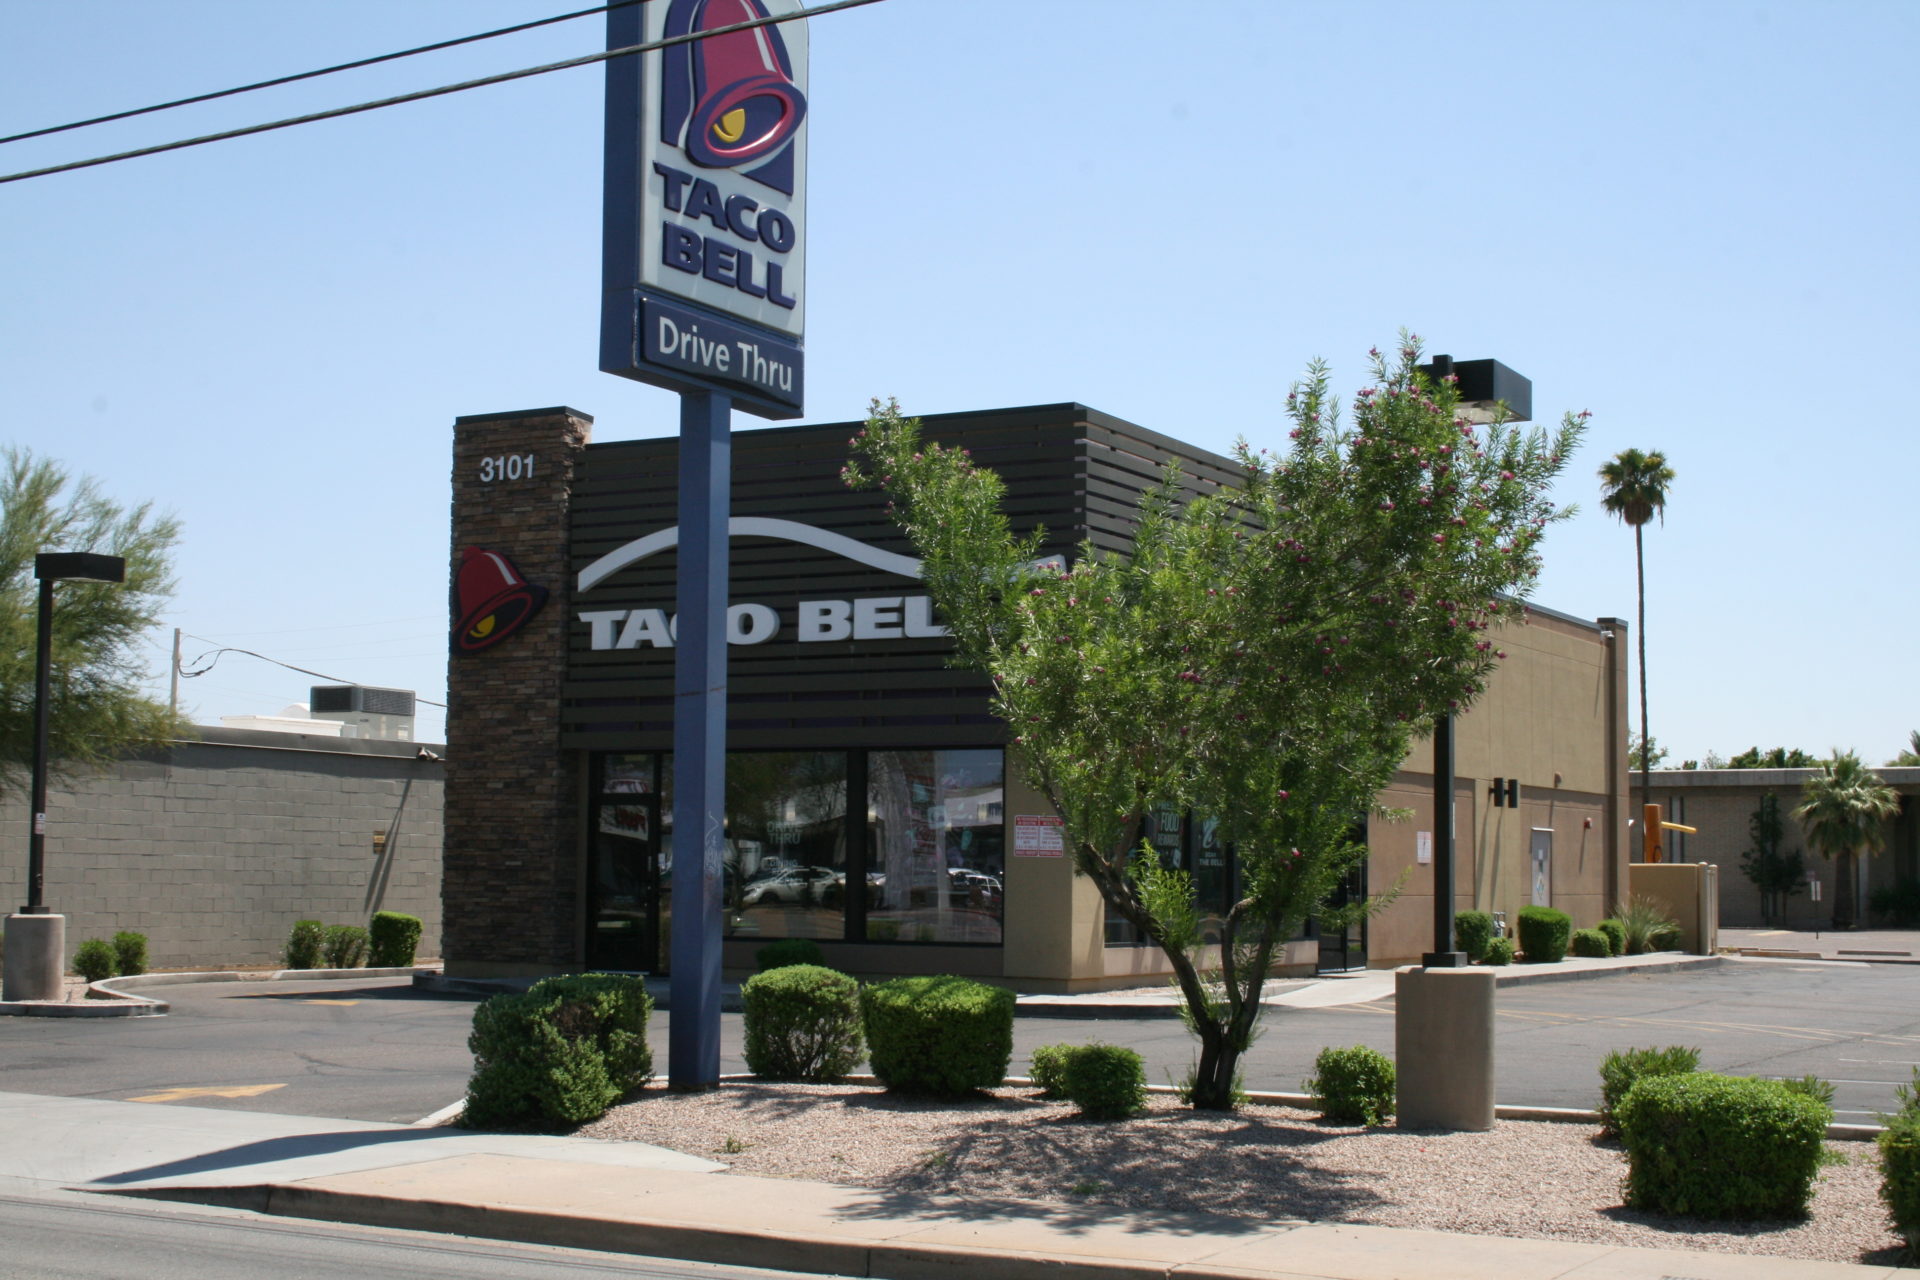 A taco bell restaurant with a tree in front of it.